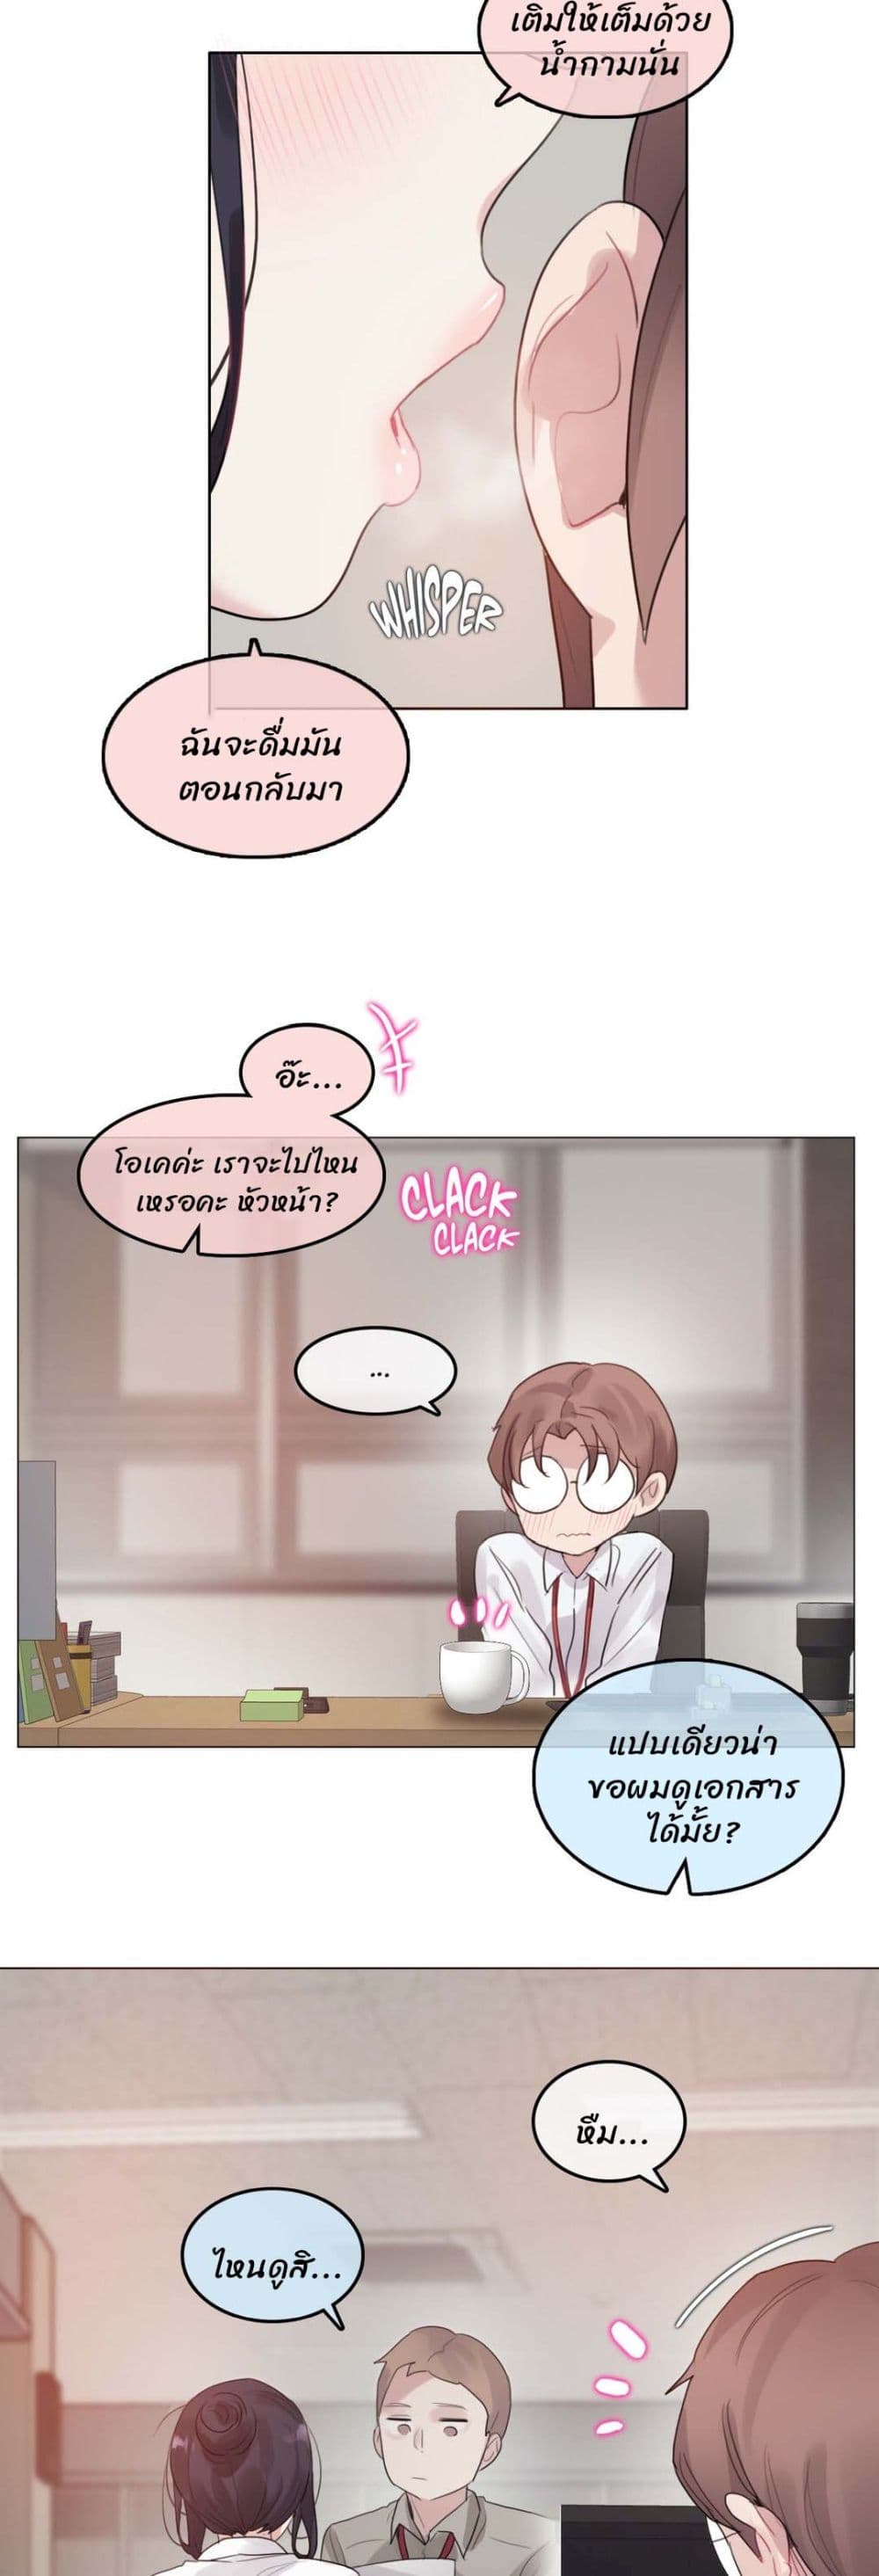 A Pervert's Daily Life 105-105